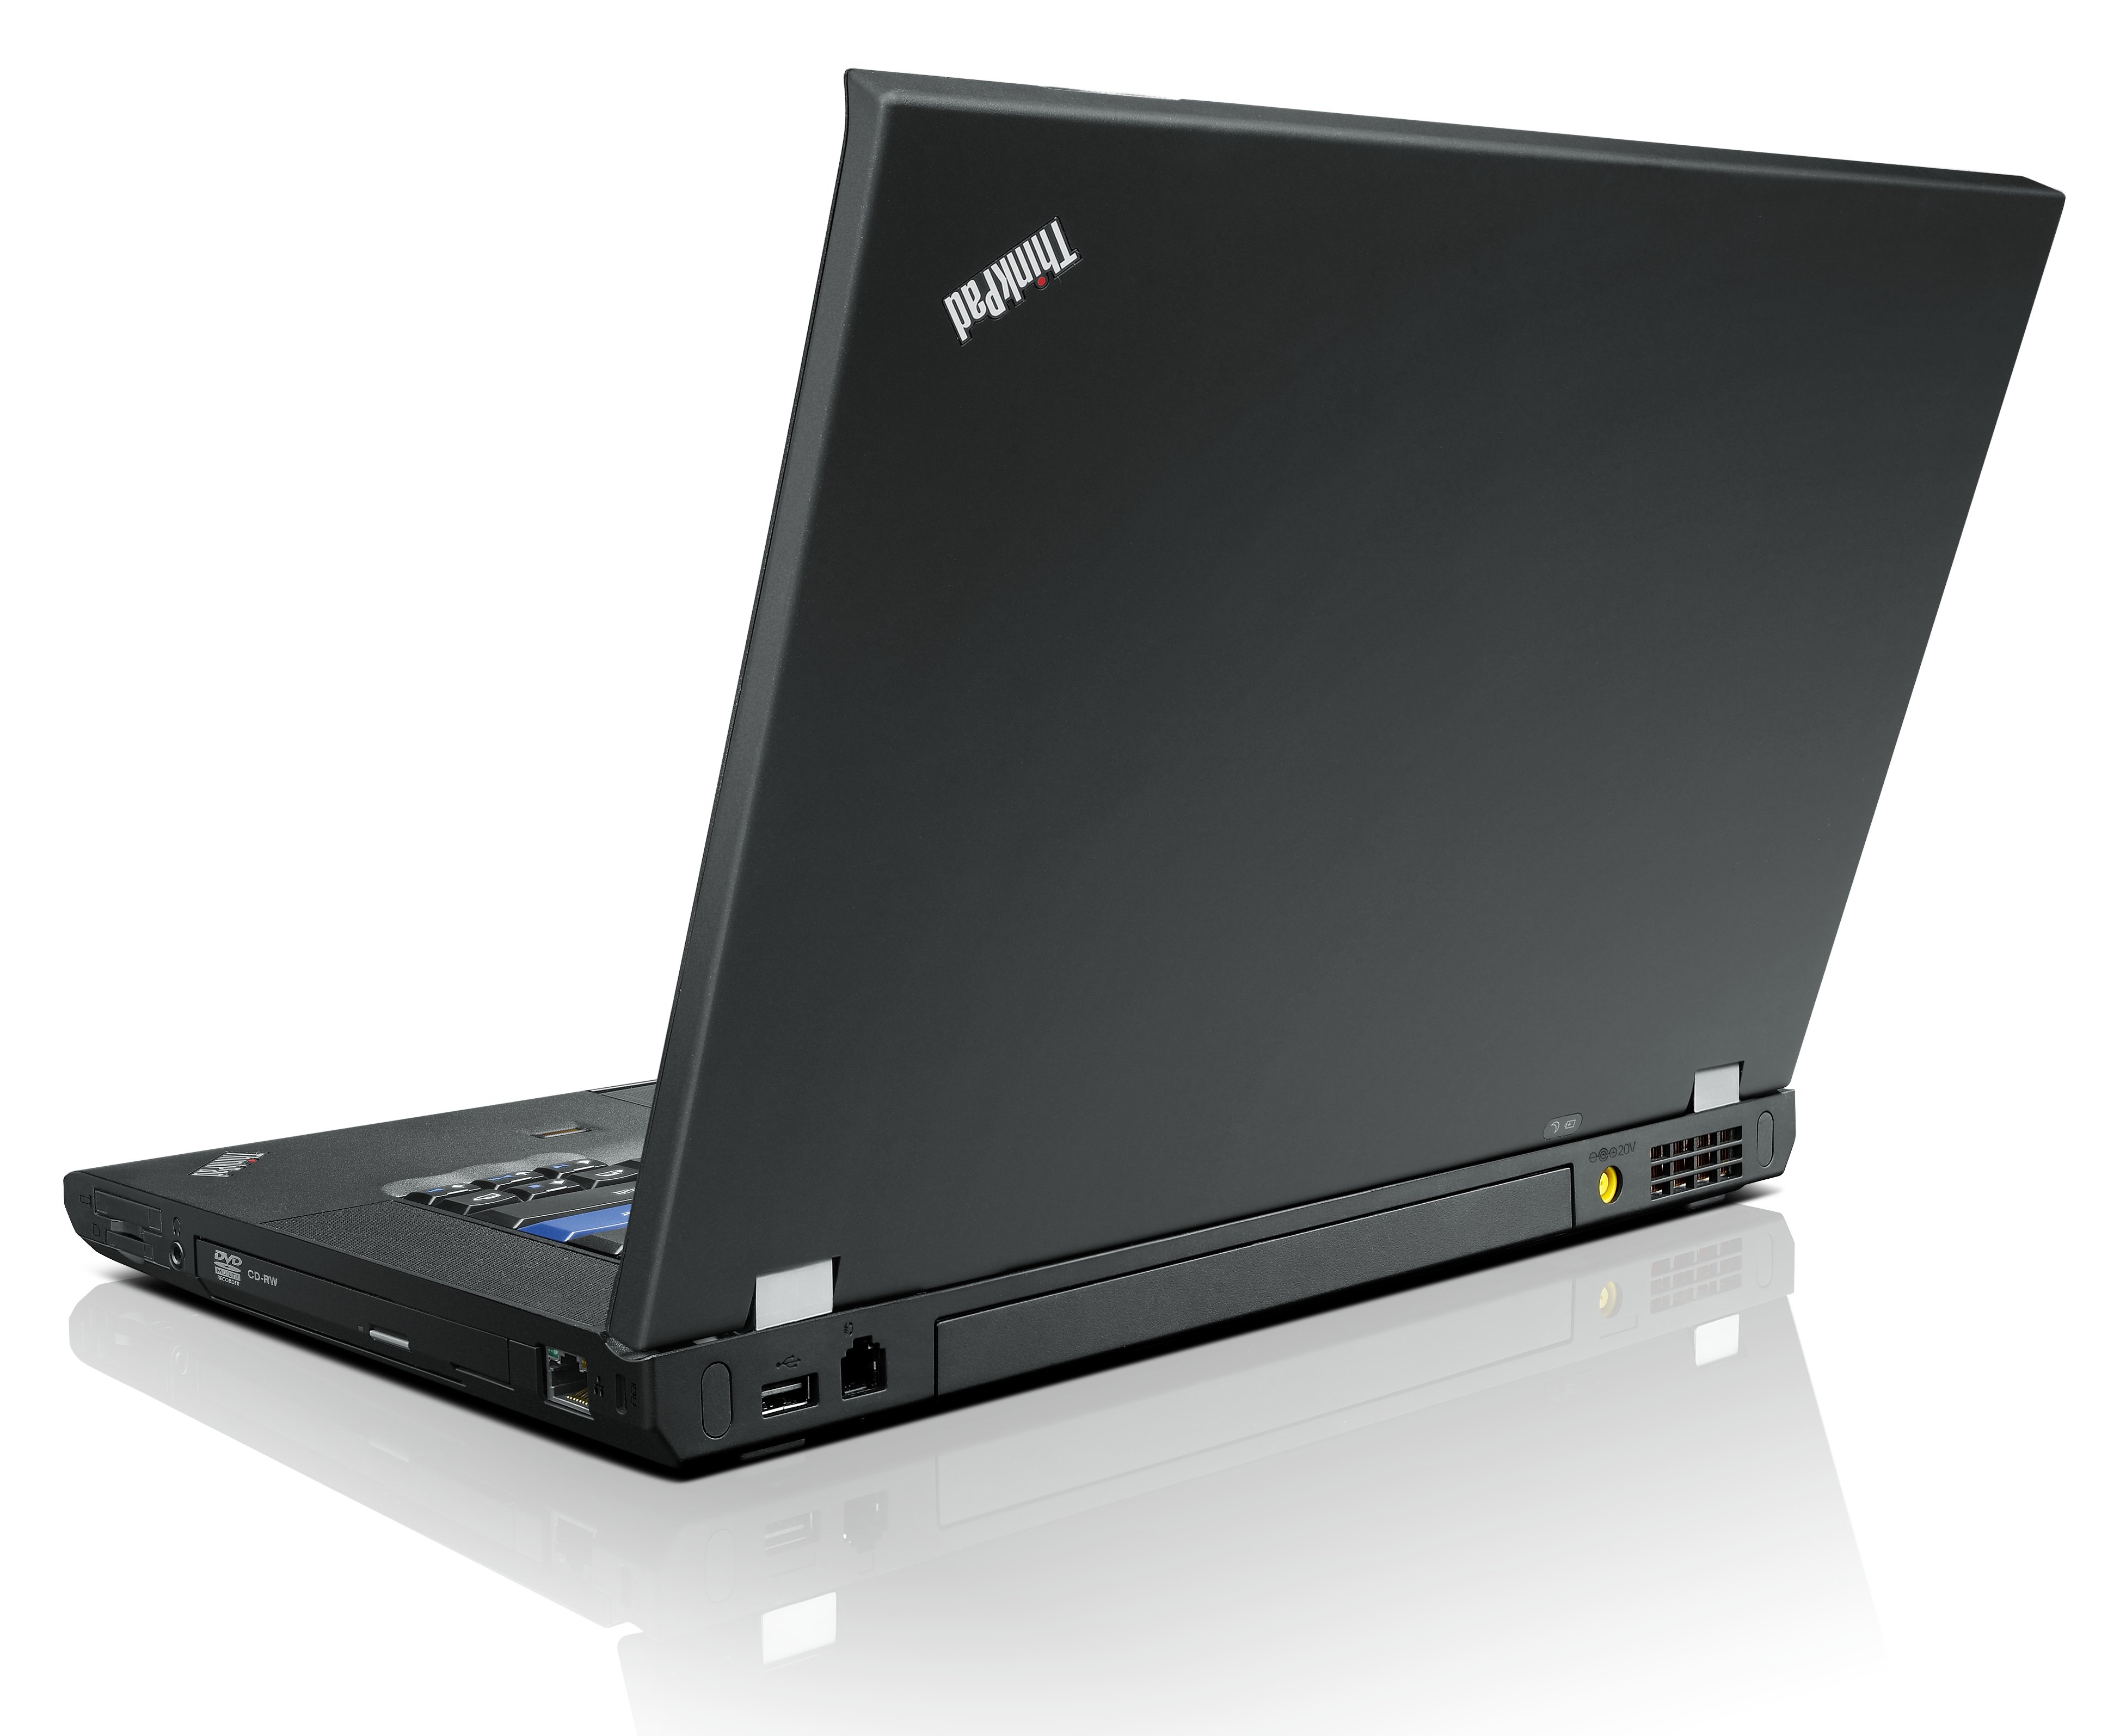 ThinkPad W520 Mobile Workstation Details, Specs and Photos (video)